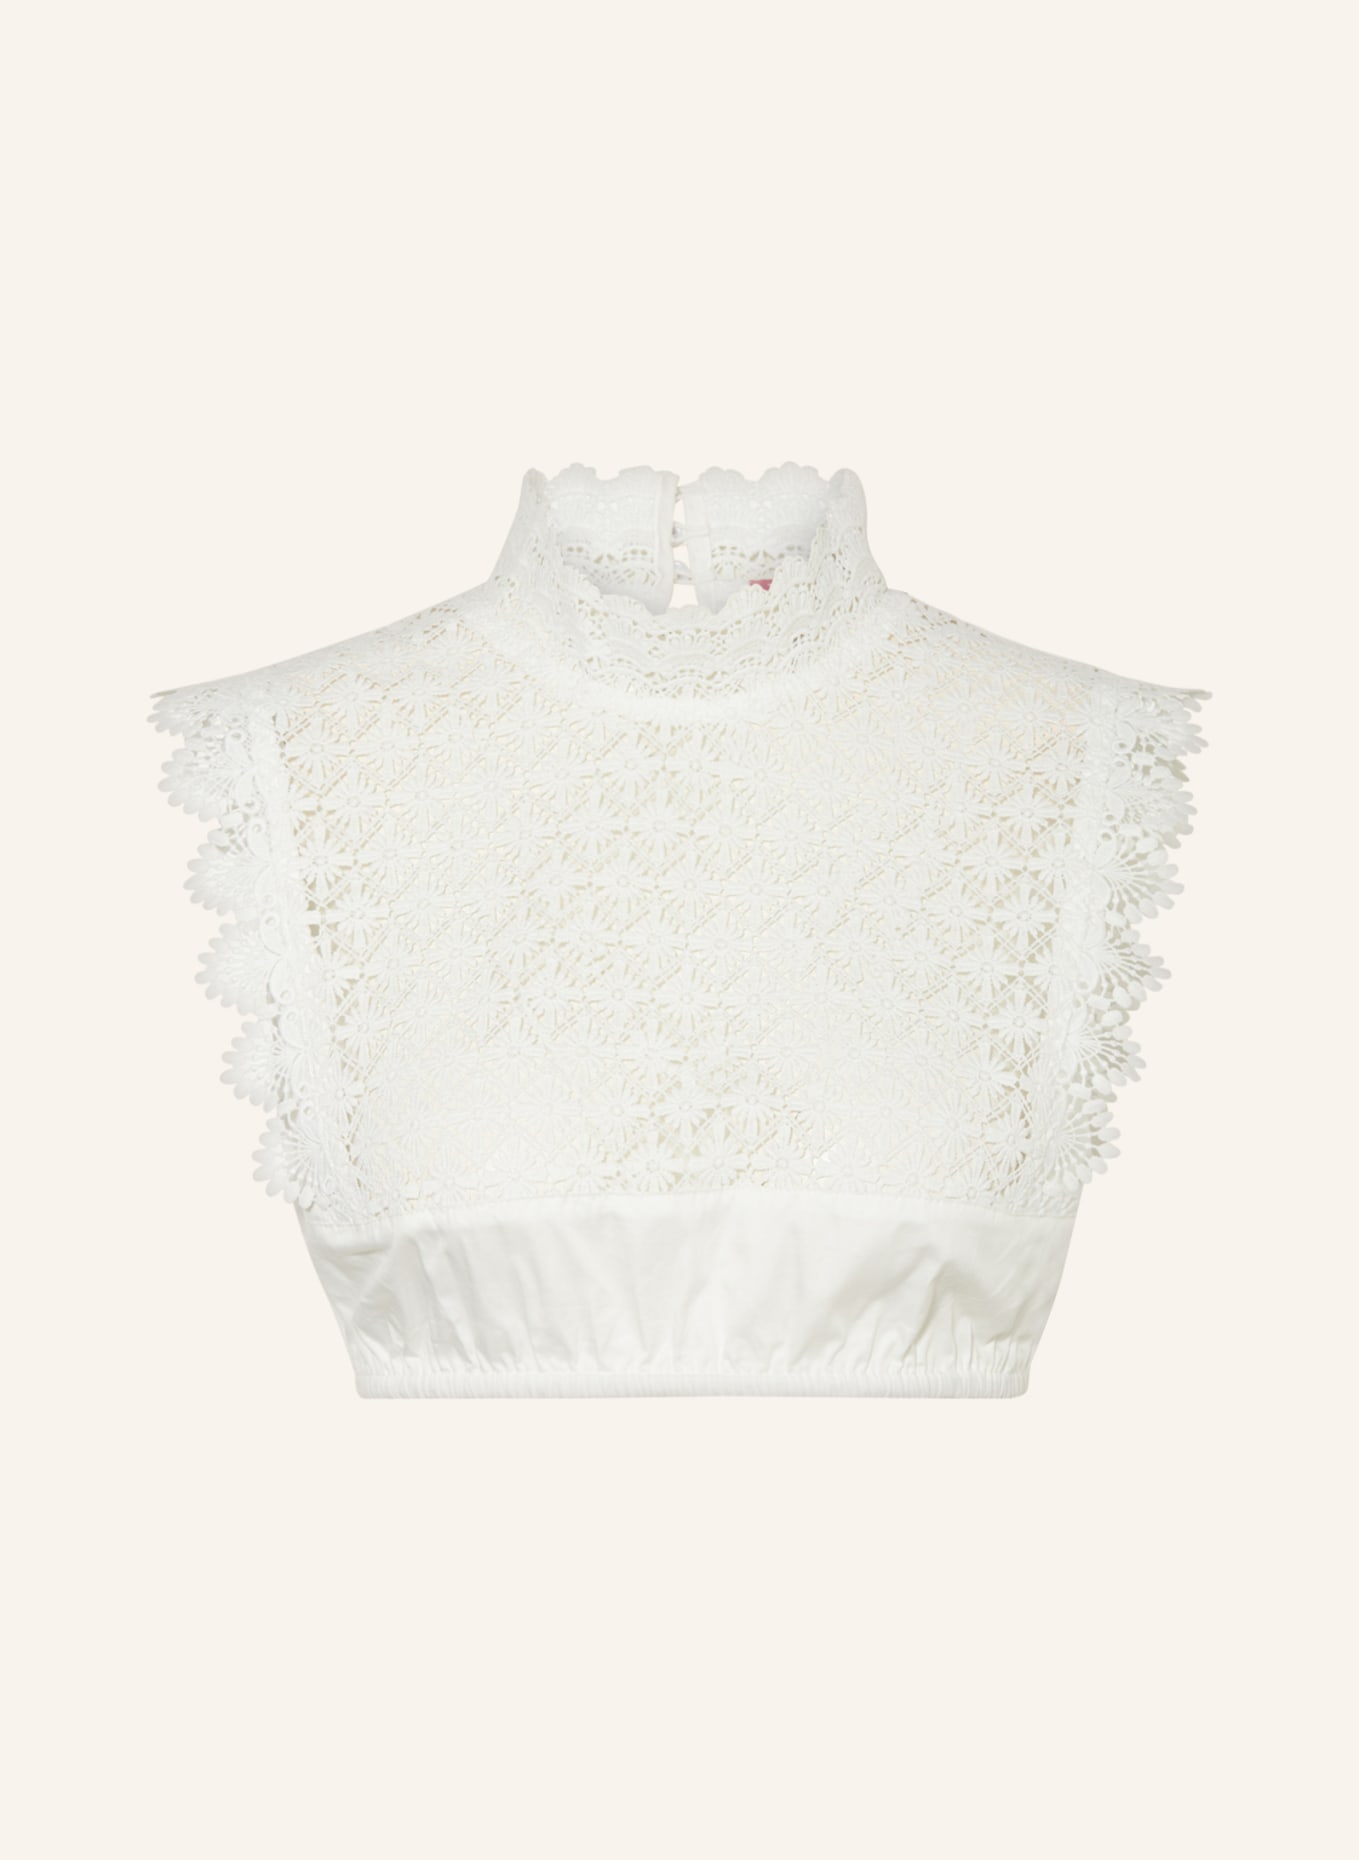 KRÜGER Dirndl blouse with broderie anglaise, Color: CREAM (Image 1)